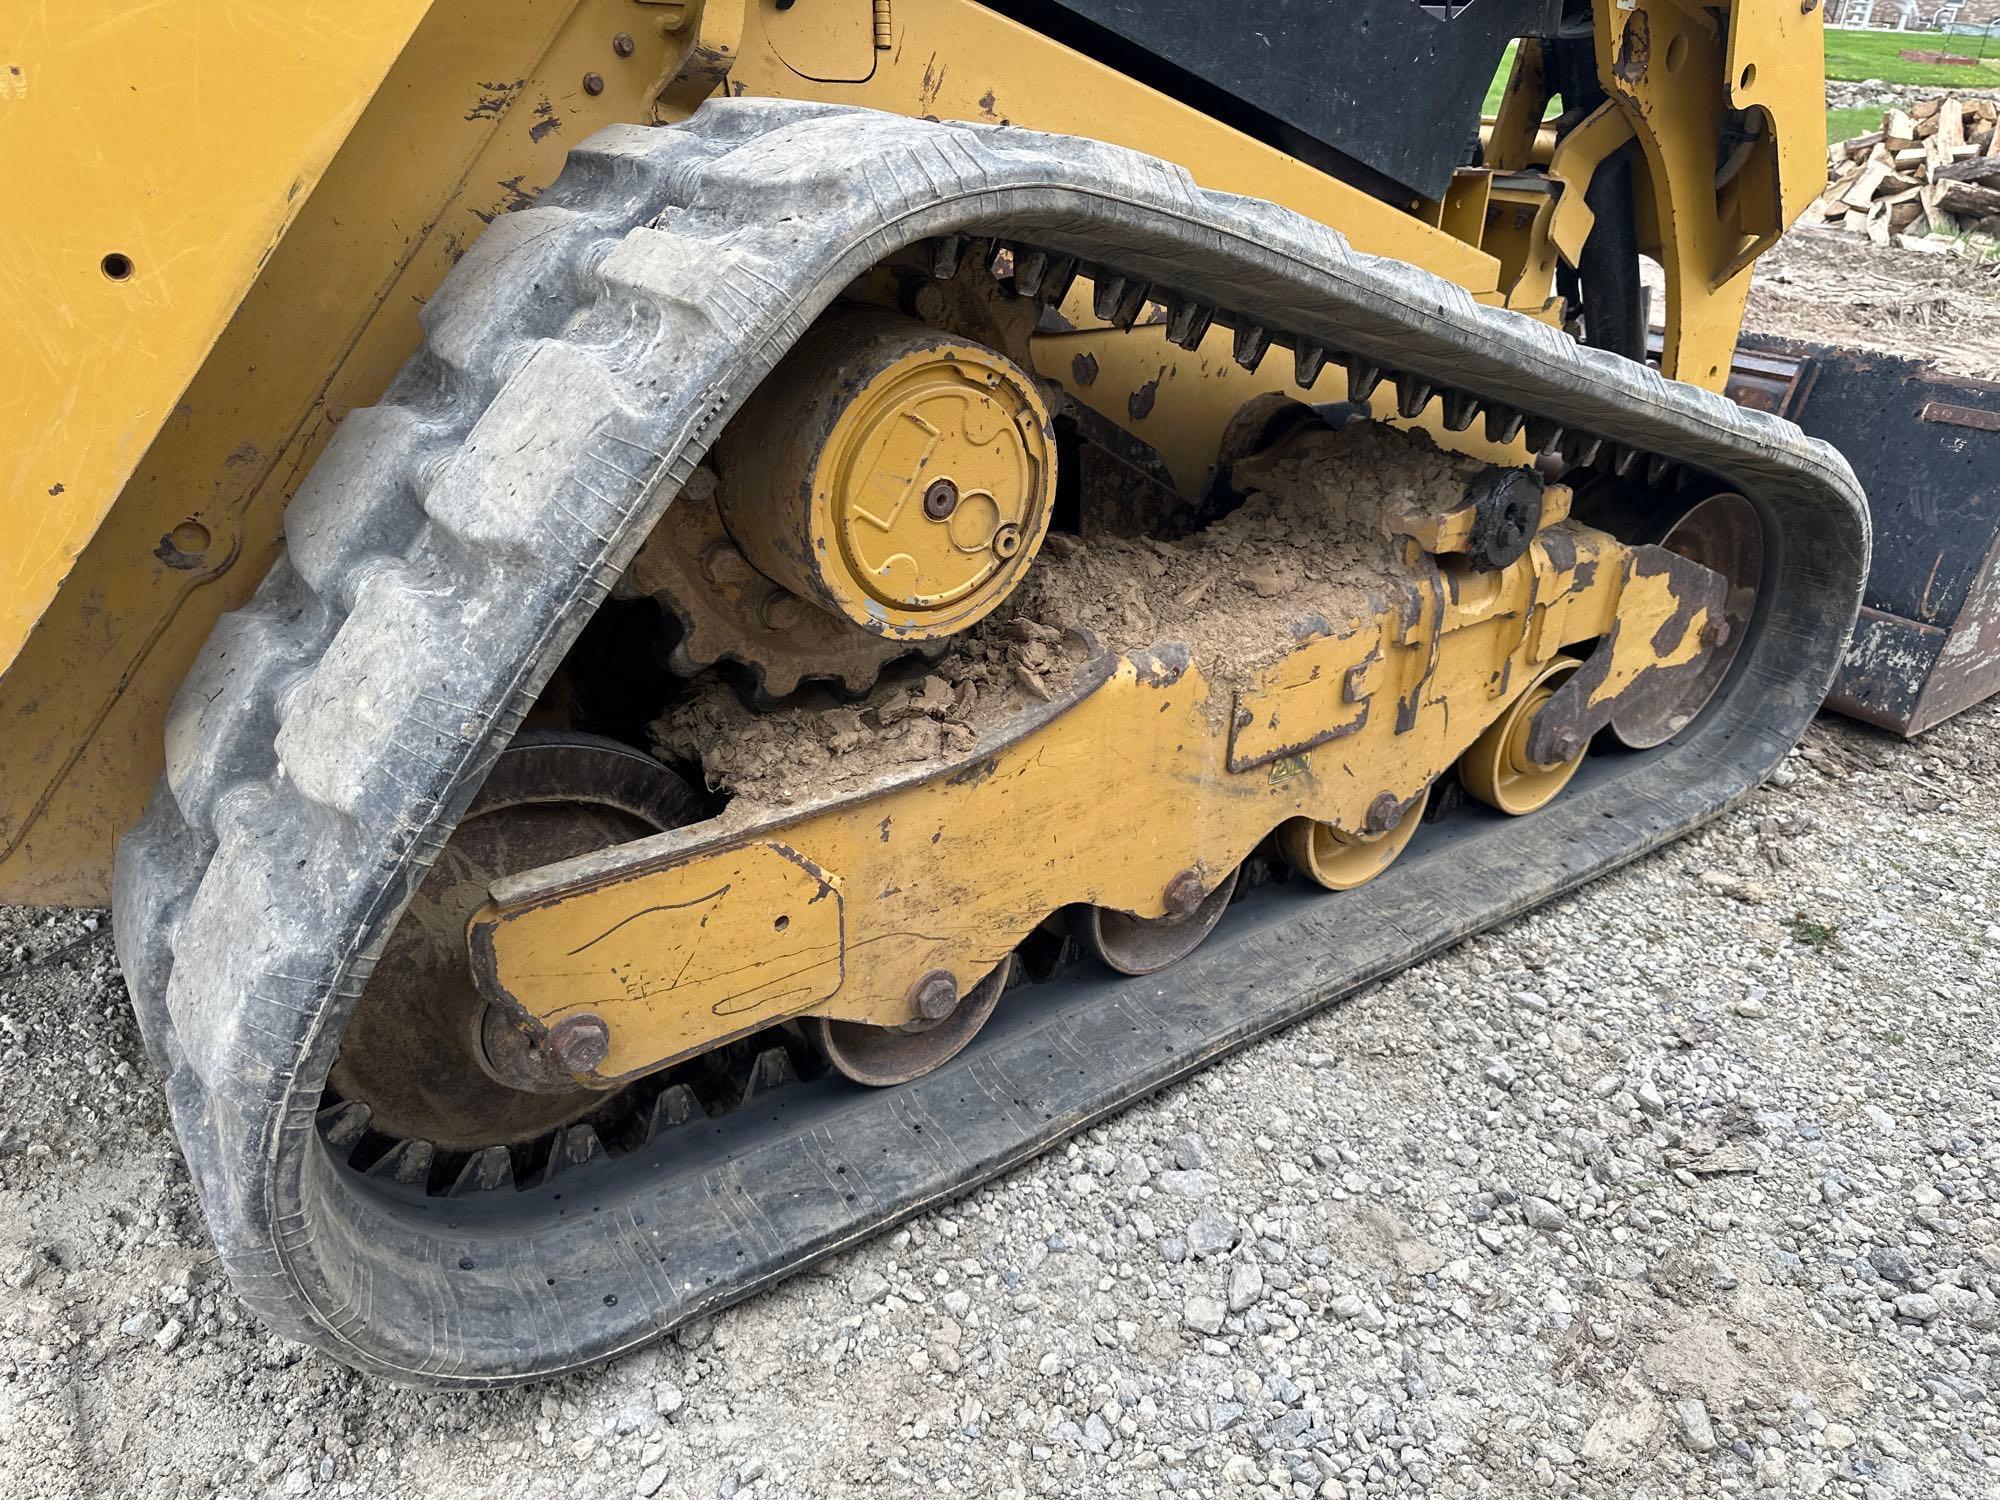 2018 CAT 259D RUBBER TRACKED SKID STEER SN:FTL15719 powered by Cat diesel engine, equipped with